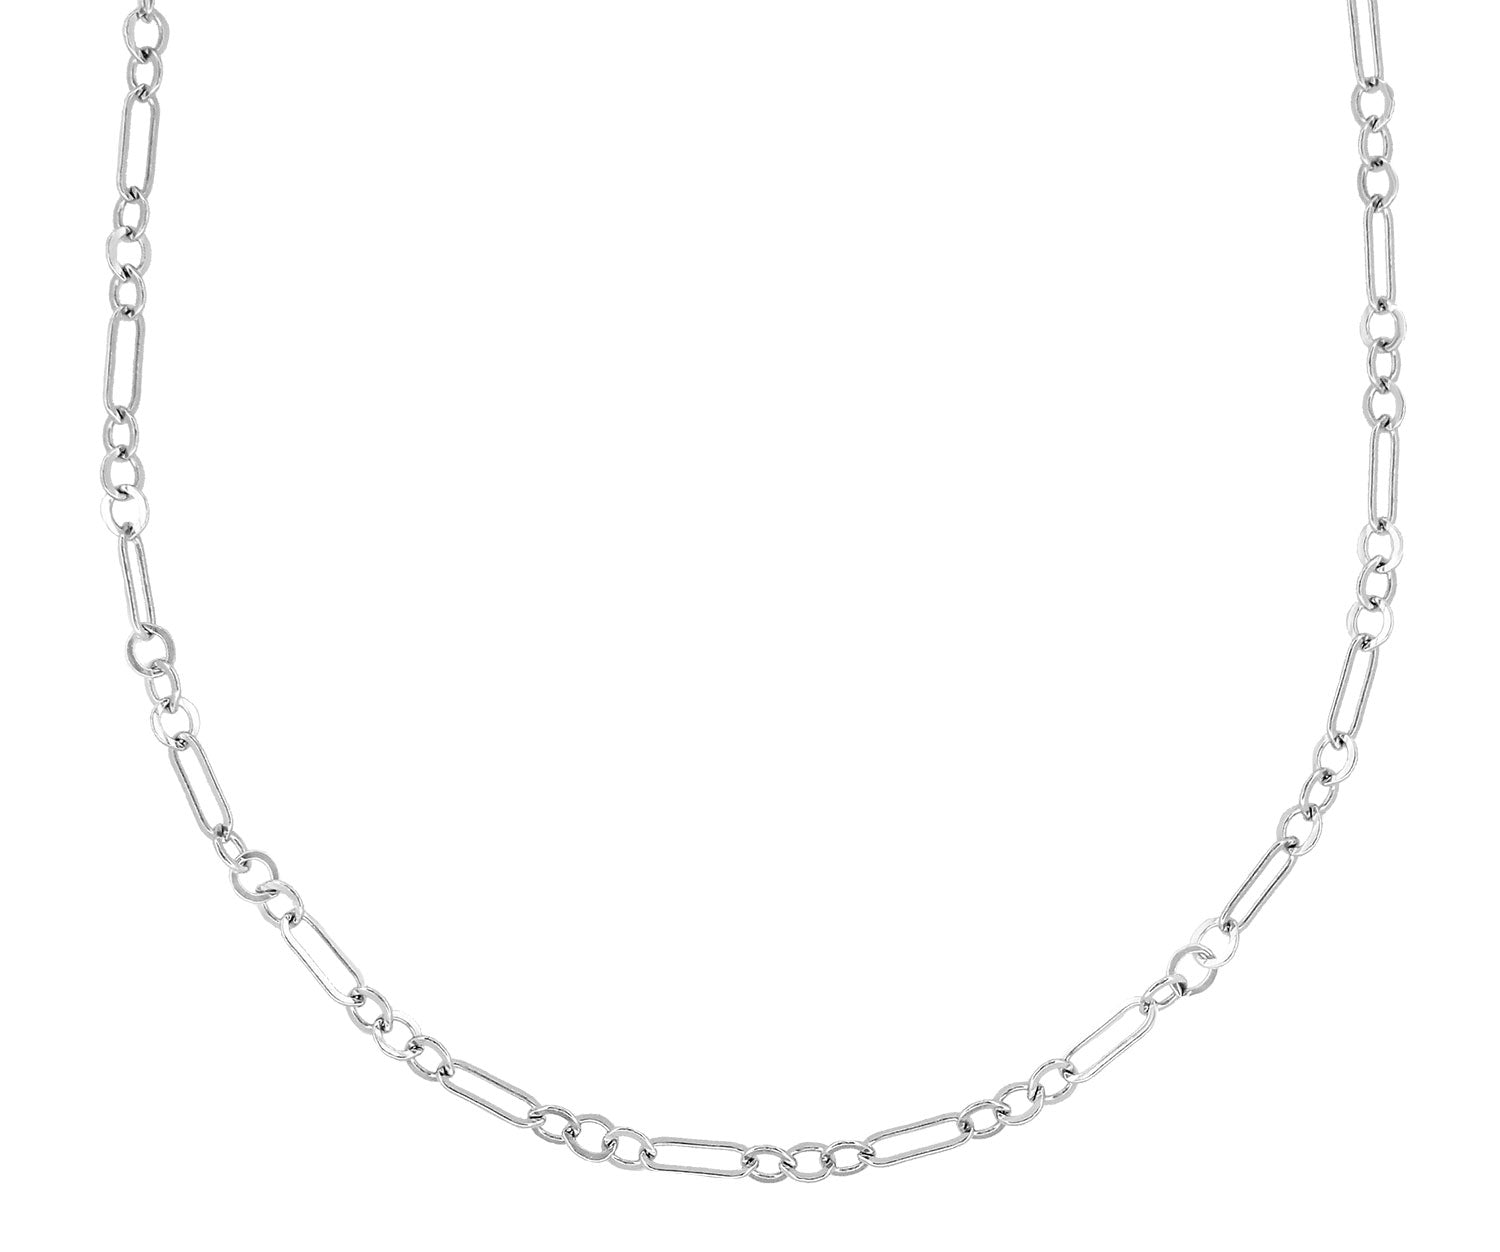 Amazon.com: Replacement Necklace Chain